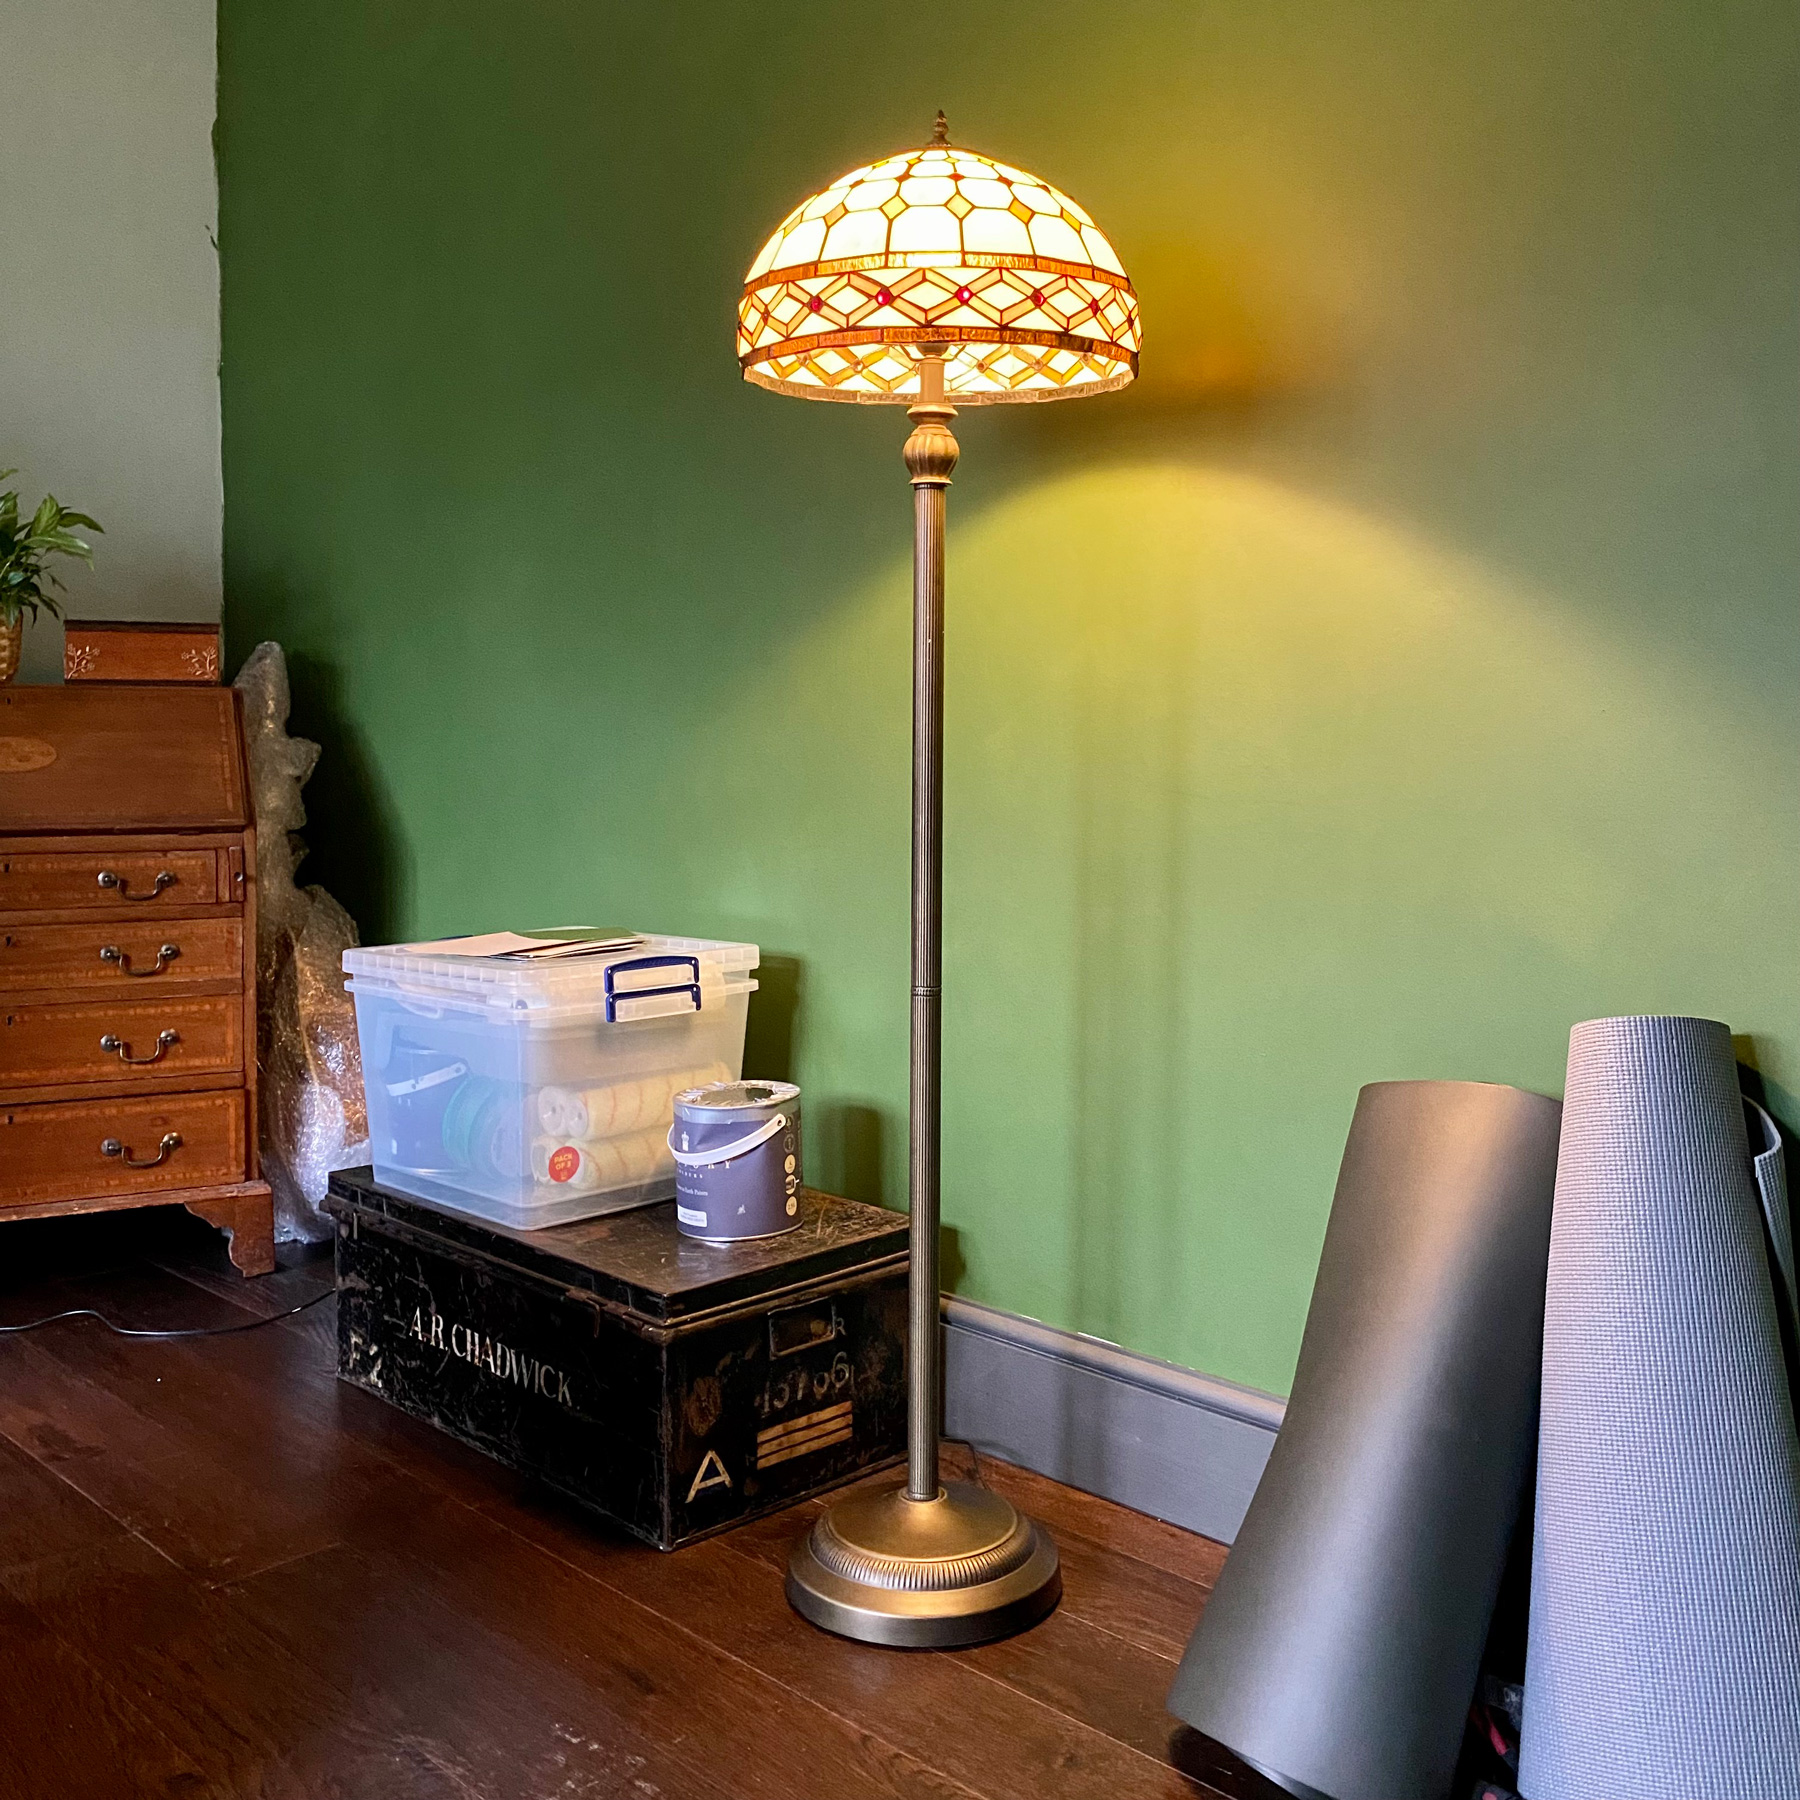 A Tiffany style floor lamp with a brass stand.